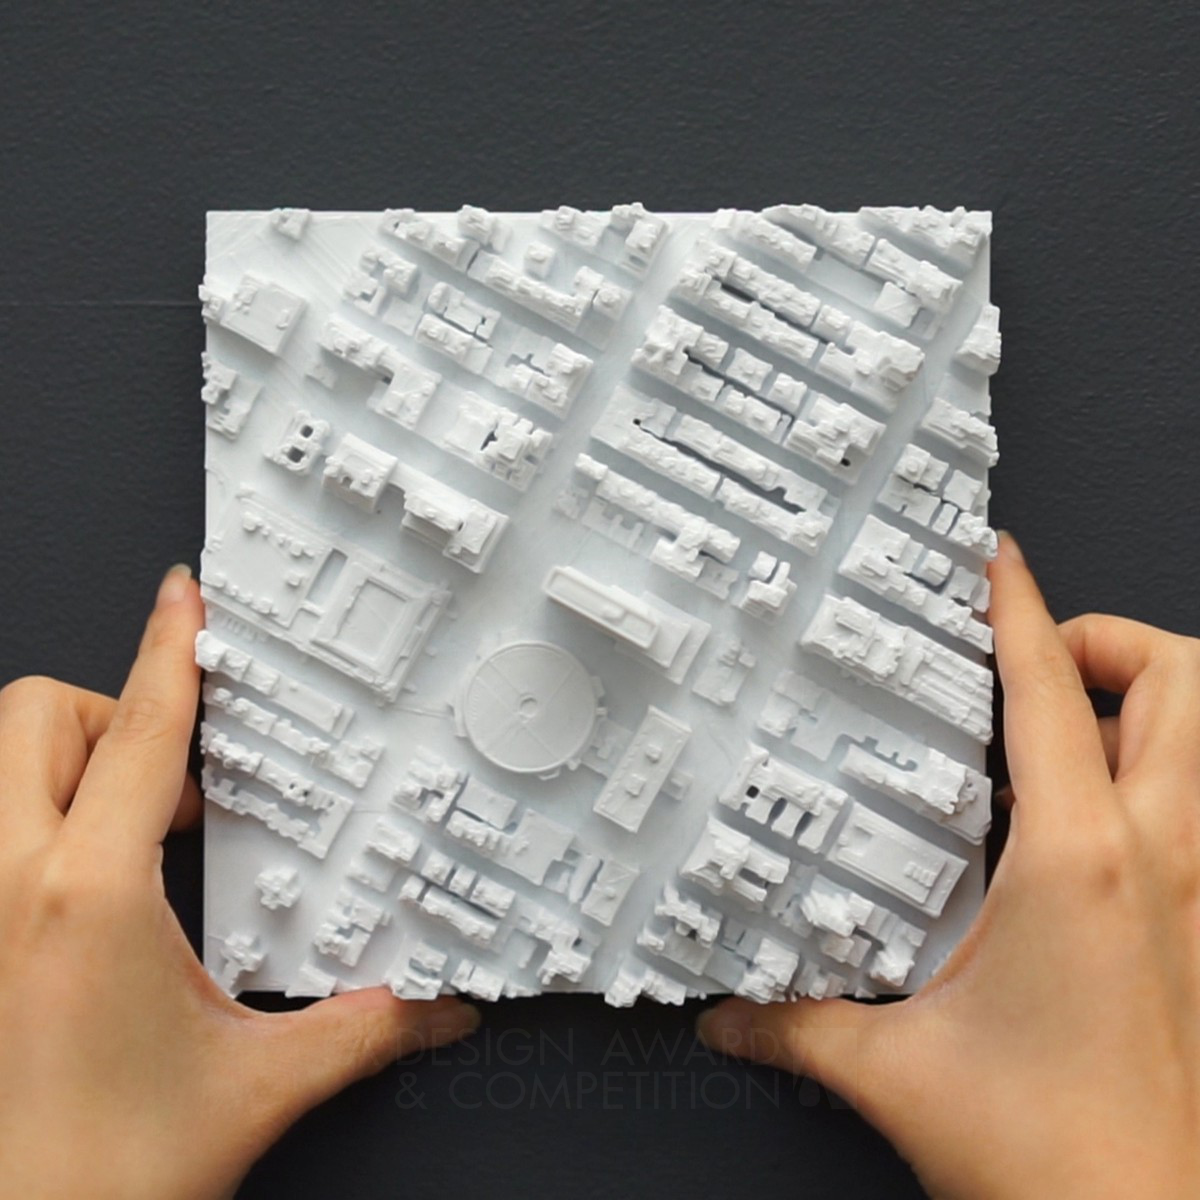 William Ngo and Alan Silverman Accurate 3d printed scale city models